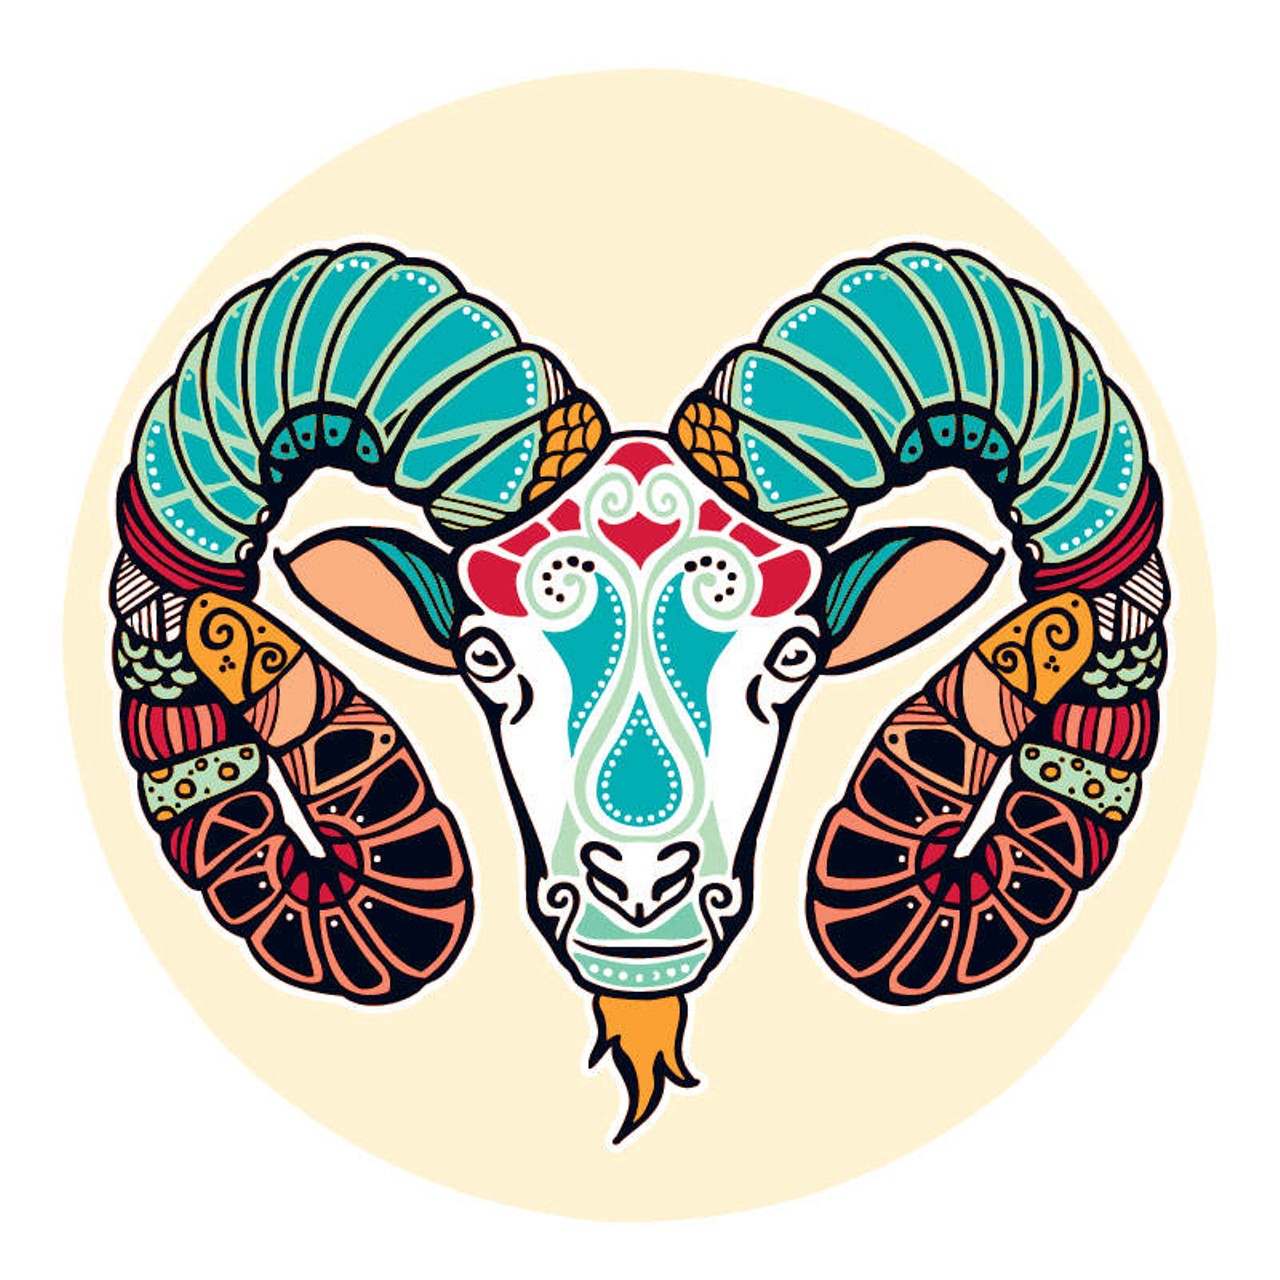 ARIES (March 21- April 20): 
No one has ever been able to tell you a thing, but I will take a chance and go for it. You can keep this up but sooner or later it&#146;ll be one of those things that reminds you what you would have done if you had known better. You have arrived at the place that everyone gets to when they realize they went too far. If you have your wits about you, it will be easier to pull your head out of your butt and tell everyone why you decided to go off the deep end. Coming back to yourself is the only way; open your heart and let all of your actions reflect your desire to love and be loved.